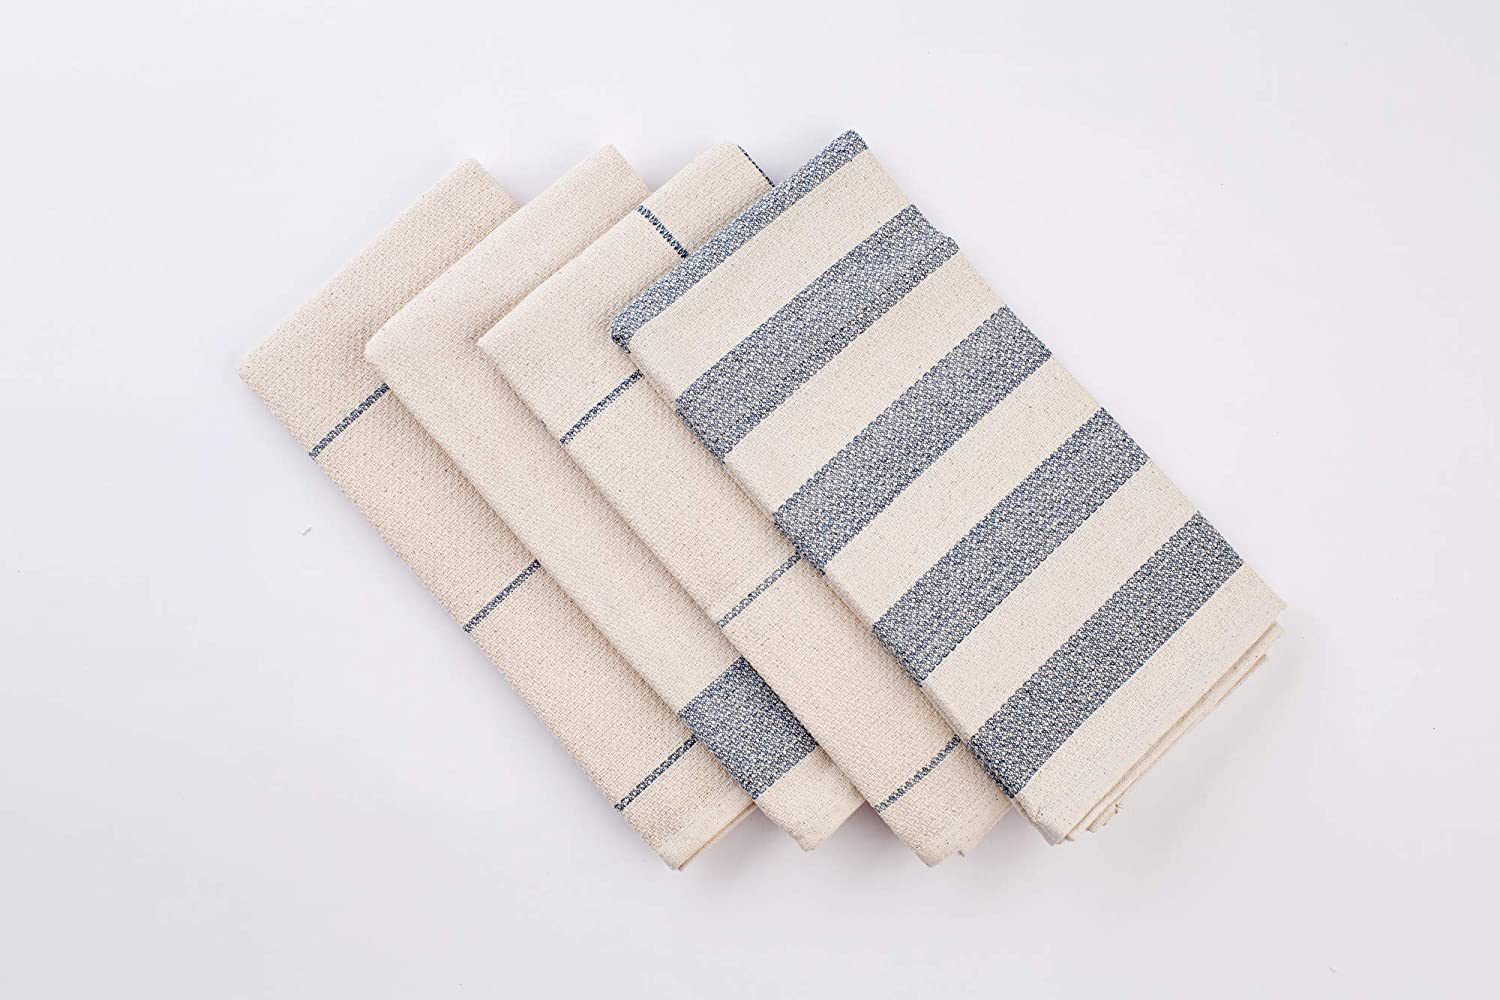 MEEMA Dish Towels for Kitchen | Set of 4, 20 X 28 In. Super Absorbent Weave Cotton Kitchen Towels | Made with Upcycled Denim and Cotton | Zero Waste Unpaper Towels, Dish Rags, and Tea Towels